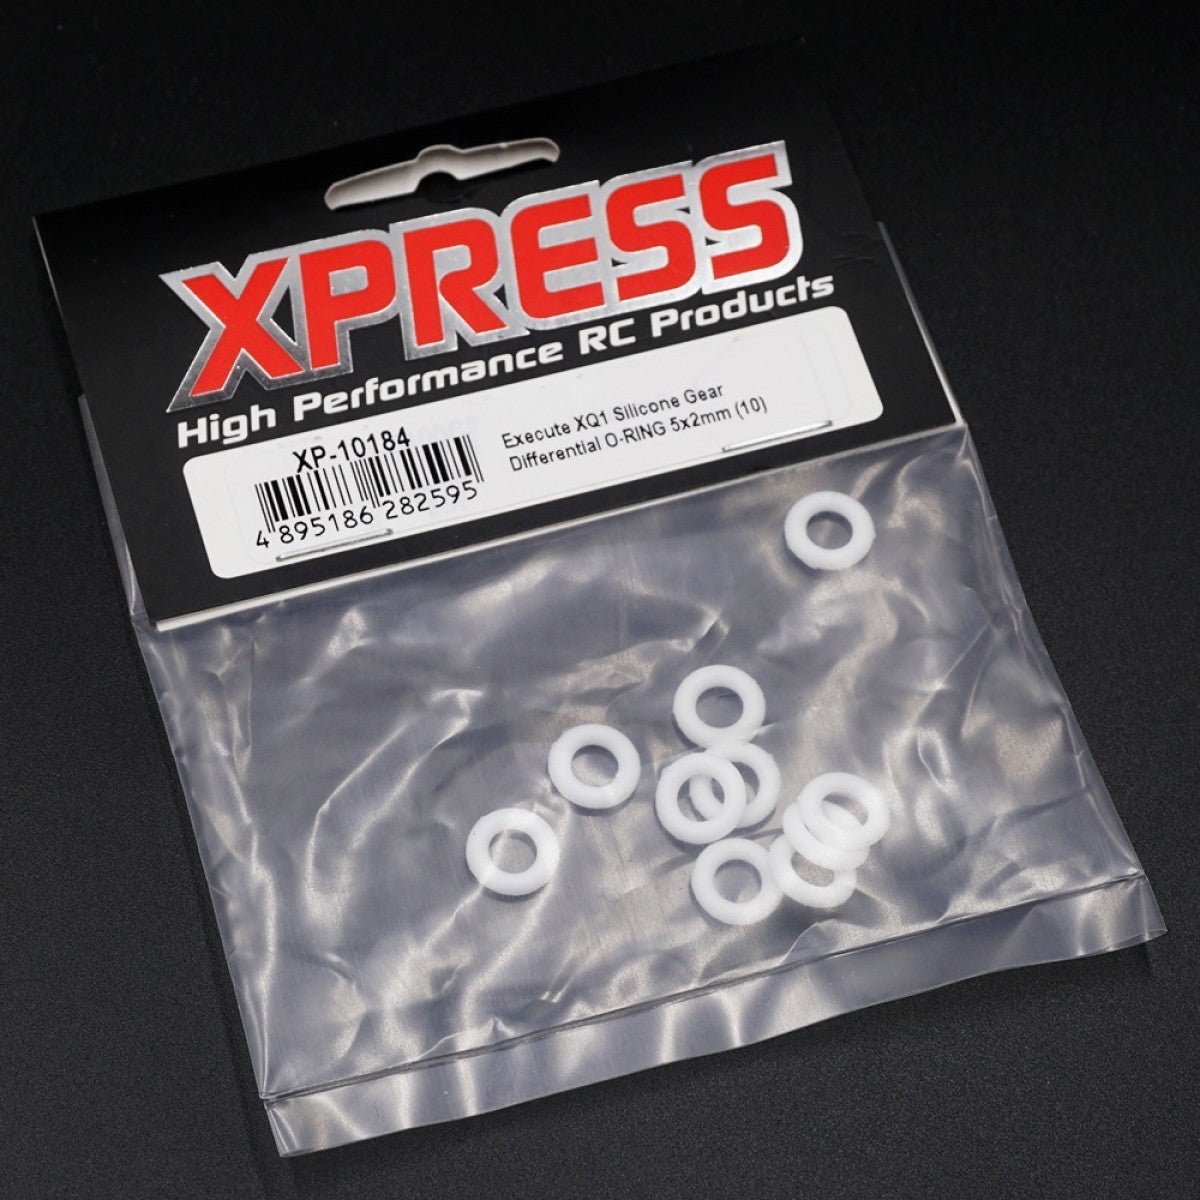 Xpress XP-10184 XQ1 Silicone Gear Differential O-RING 5x2mm 10pcs